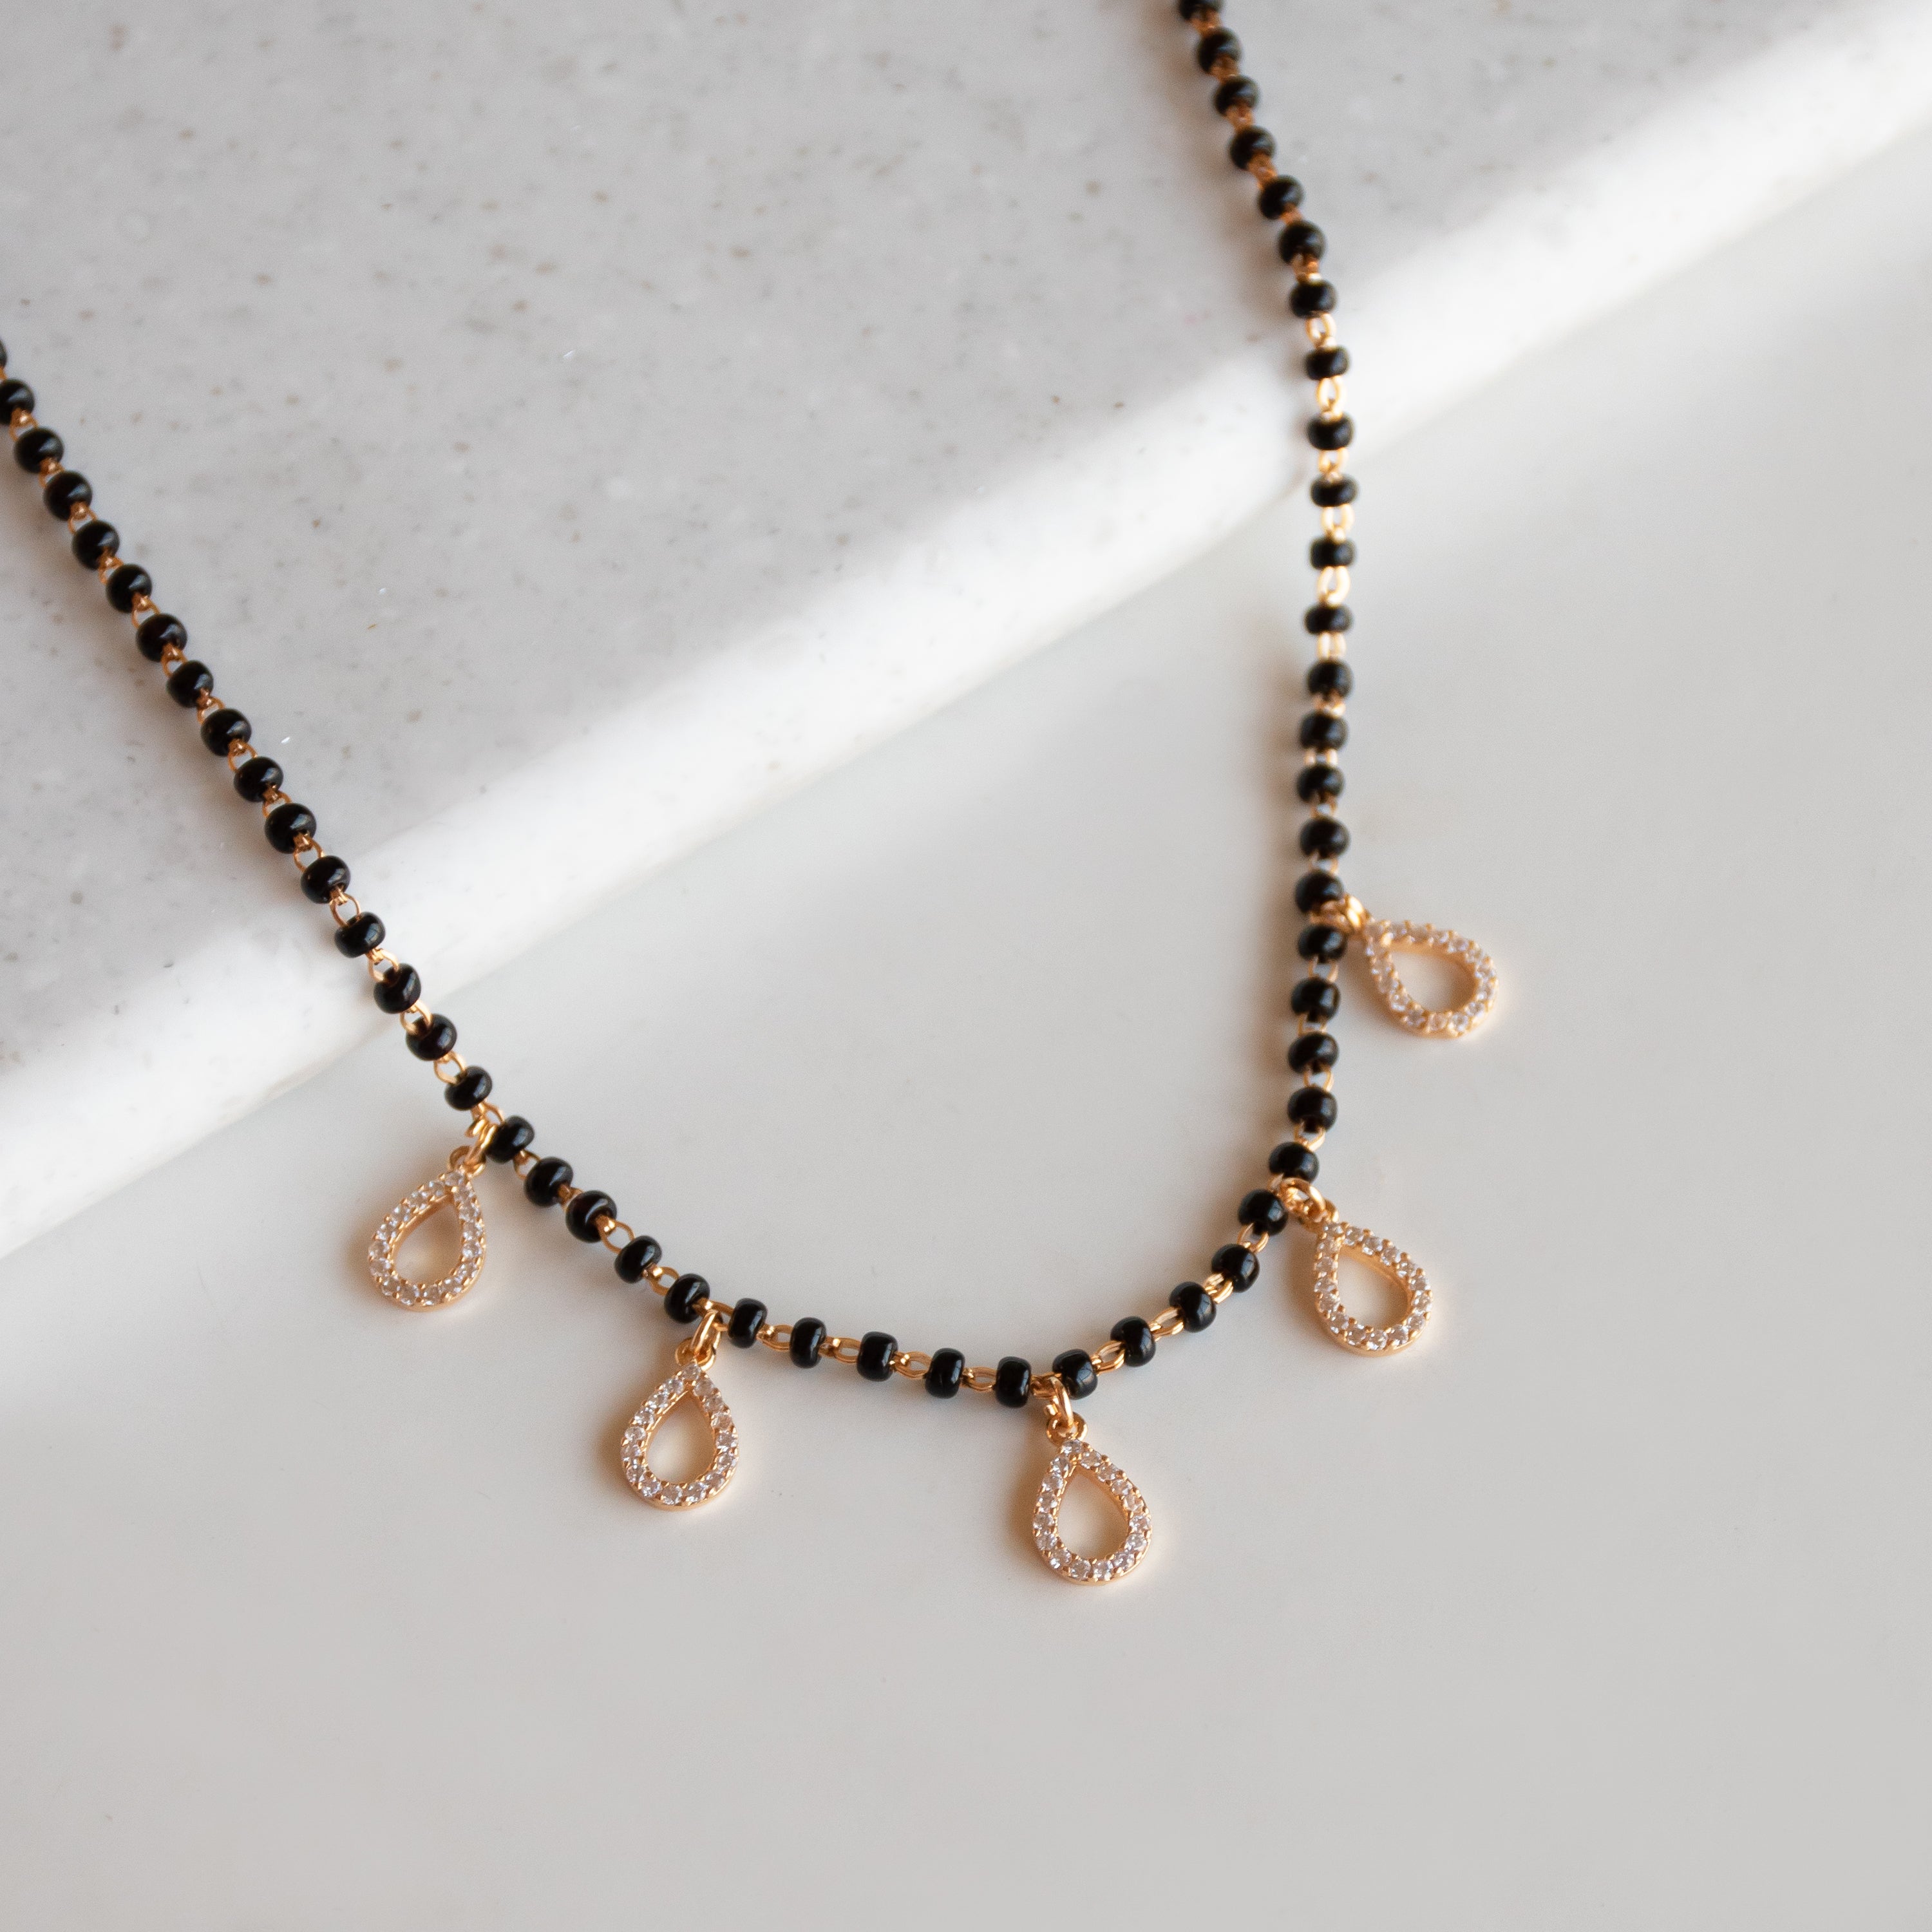 Dainty Five Charm Pear Mangalsutra Necklace